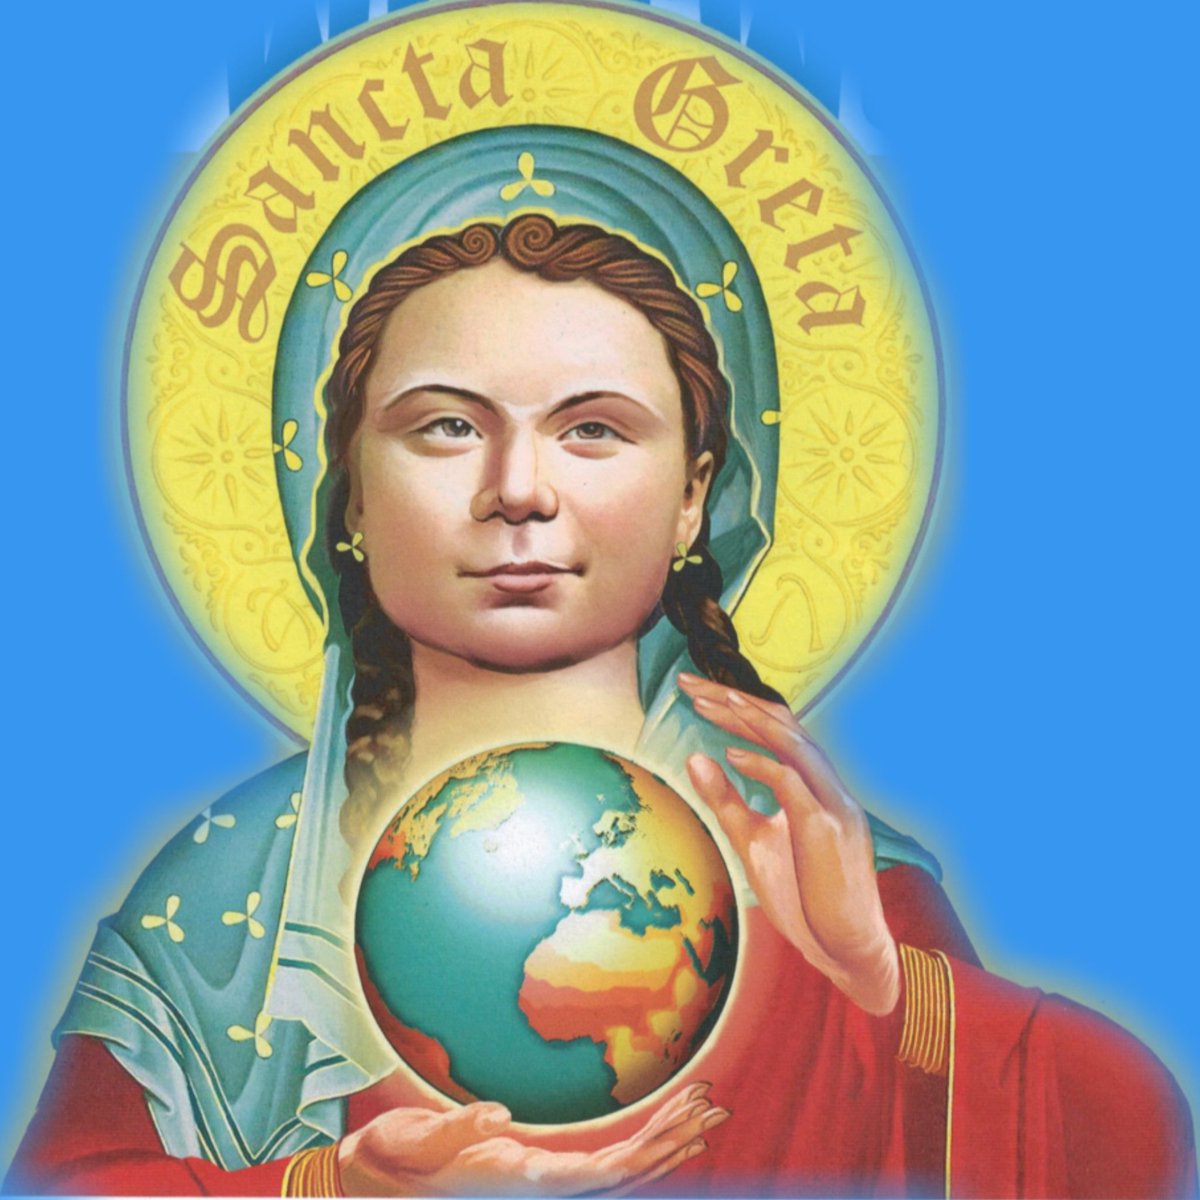 St. Greta Spreads the Climate Gospel - The Global Warming Policy Forum